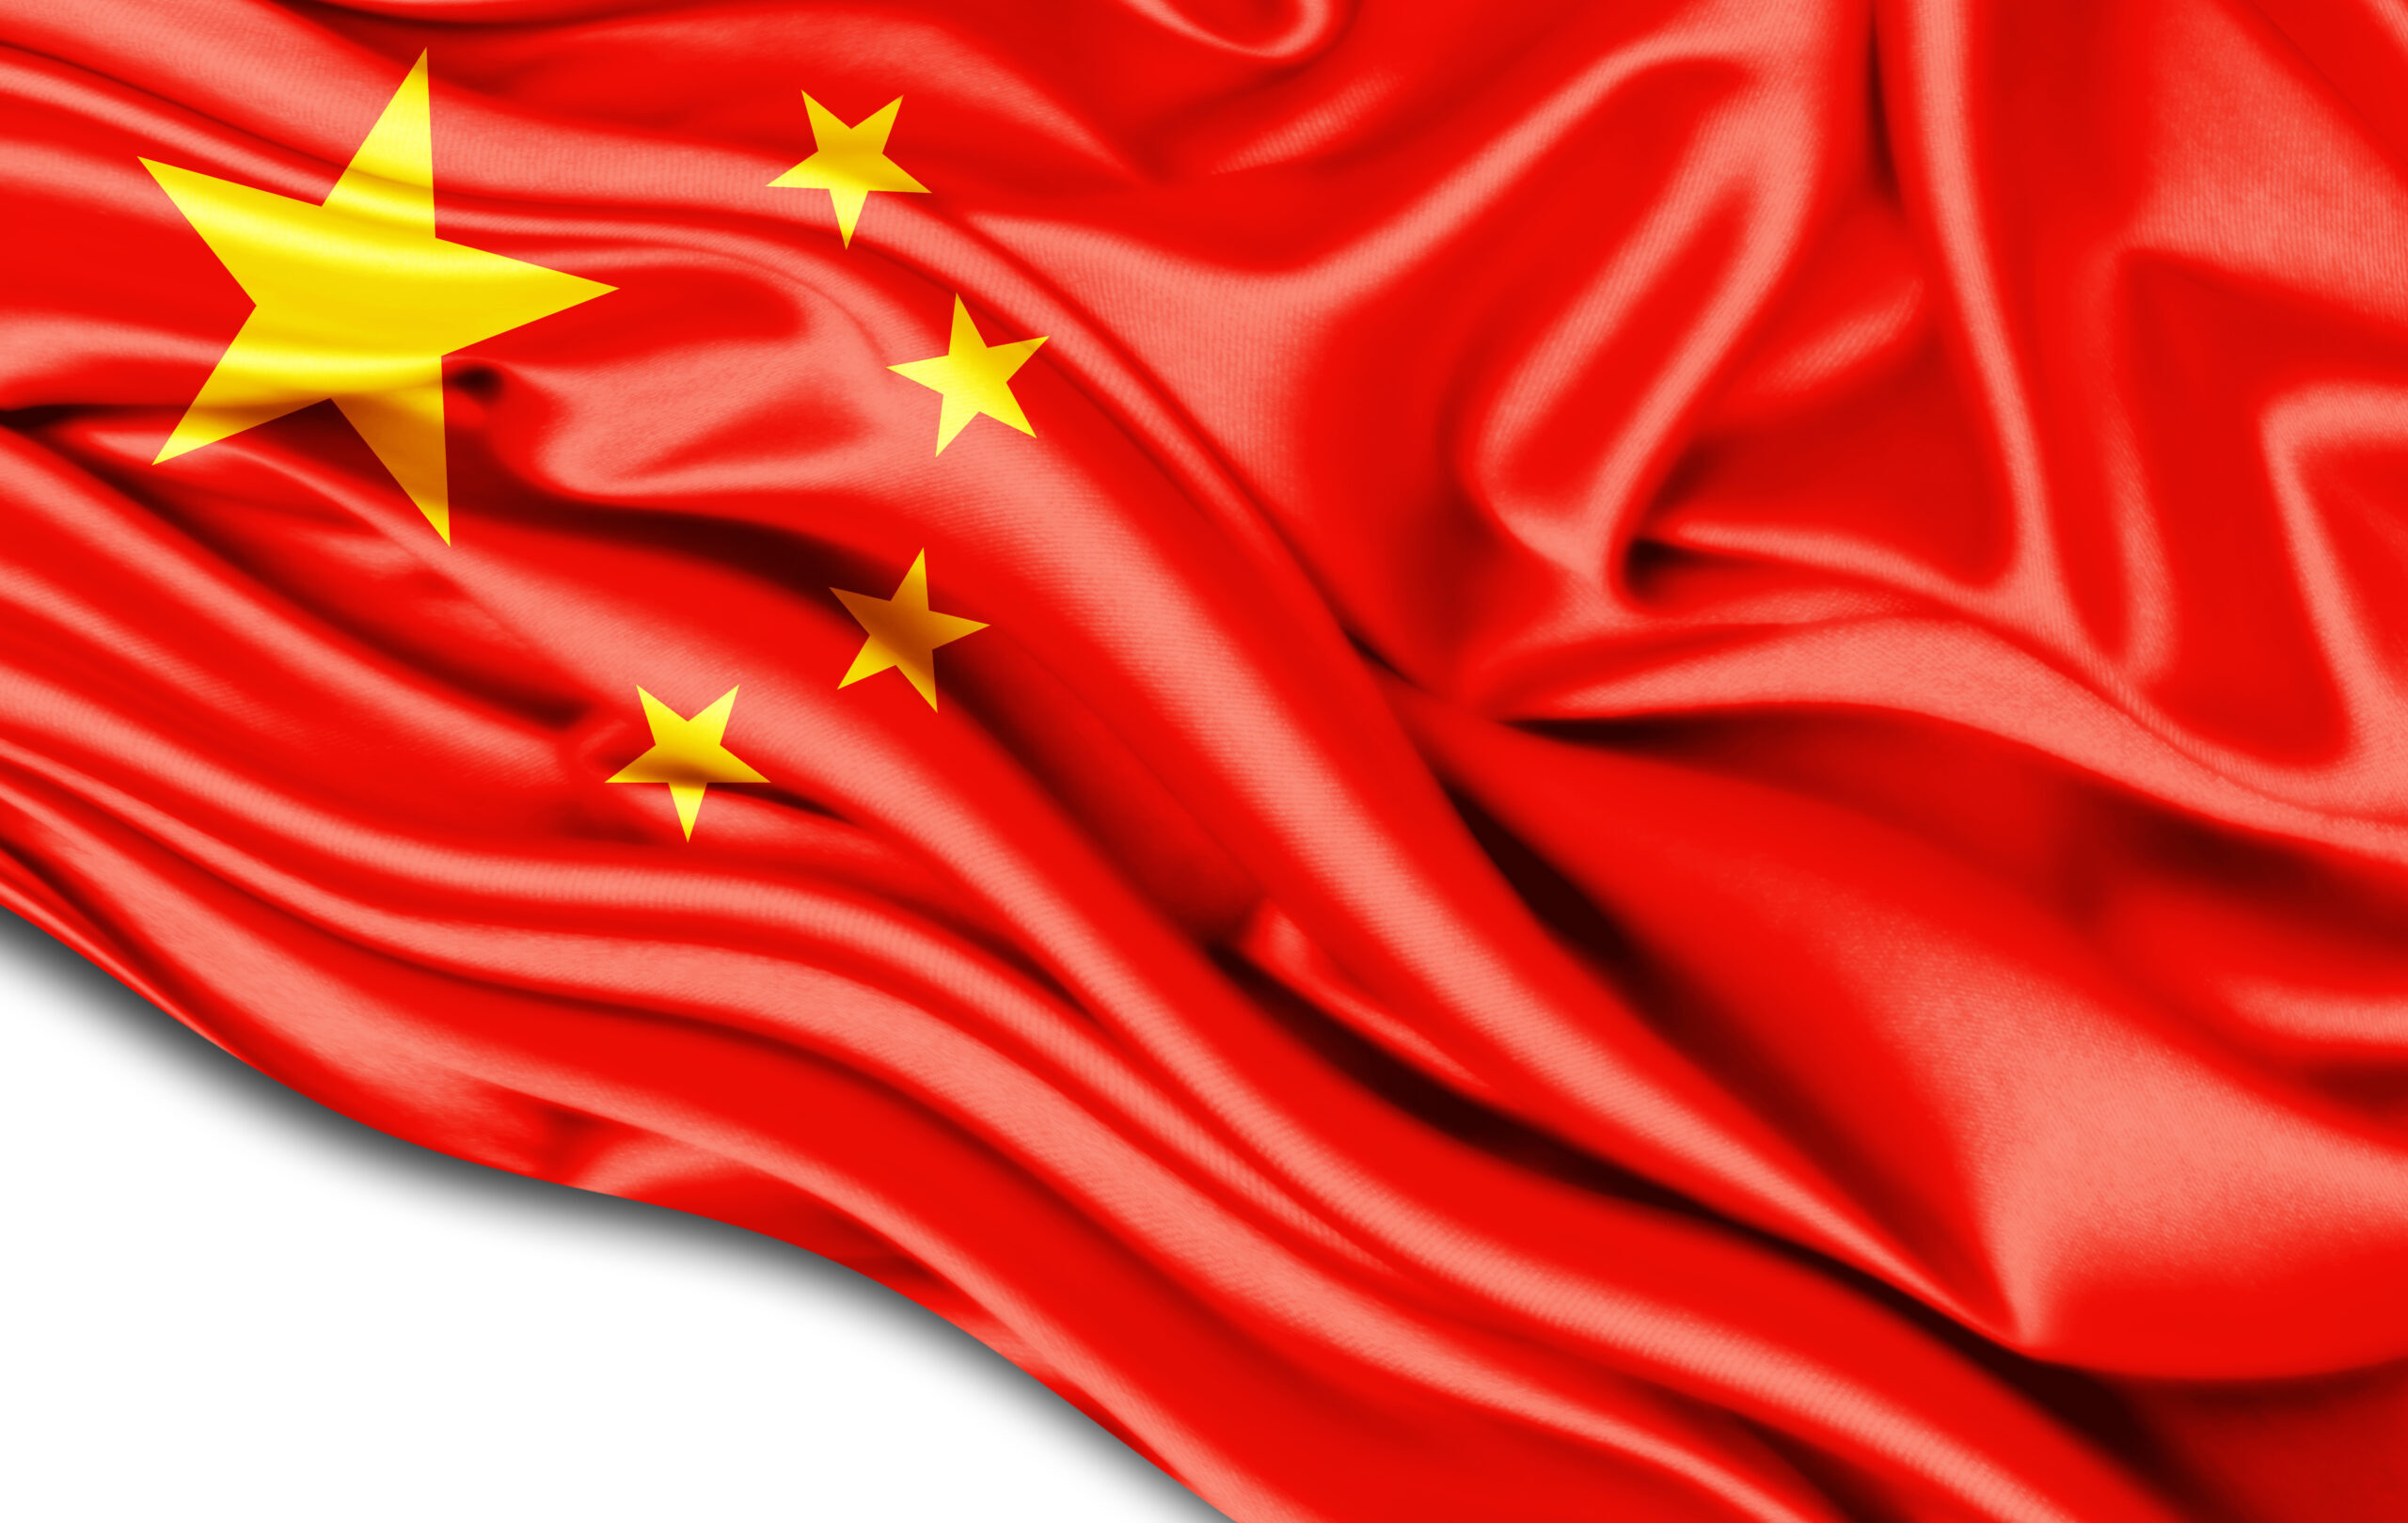 China,Flag,Of,Silk,With,Copyspace,For,Your,Text,Or